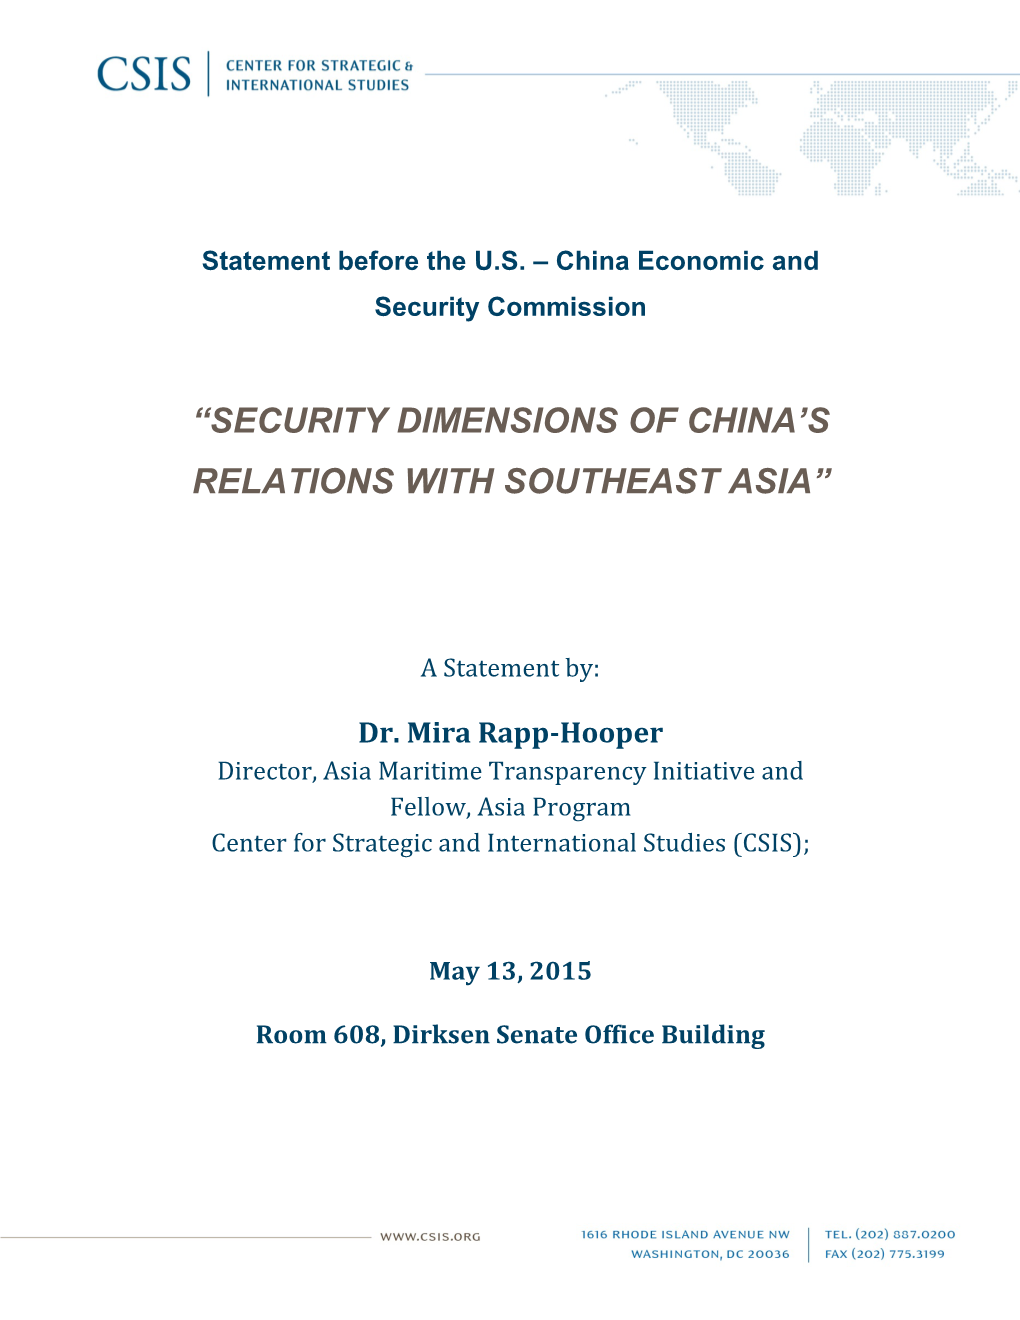 Security Dimensions of China's Relations with Southeast Asia